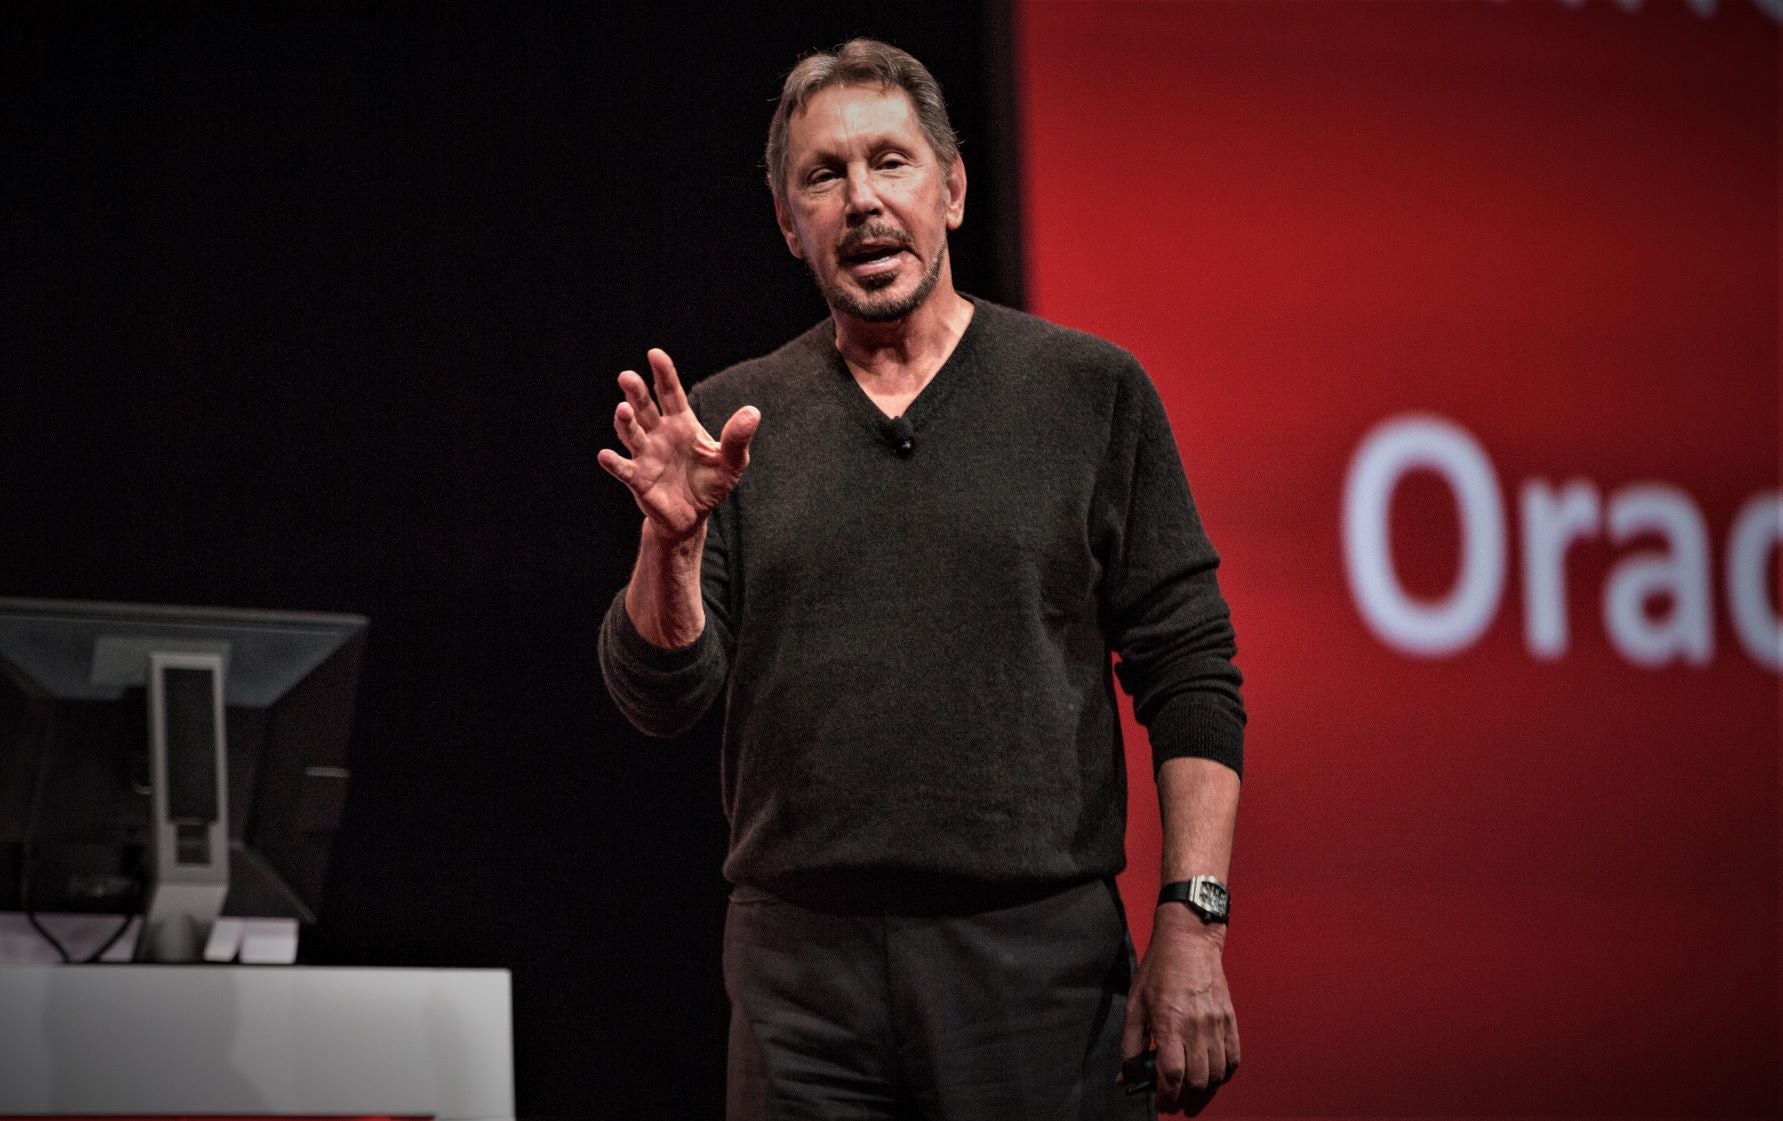 What Larry Ellison told Investors this Week was Completely Inaccurate